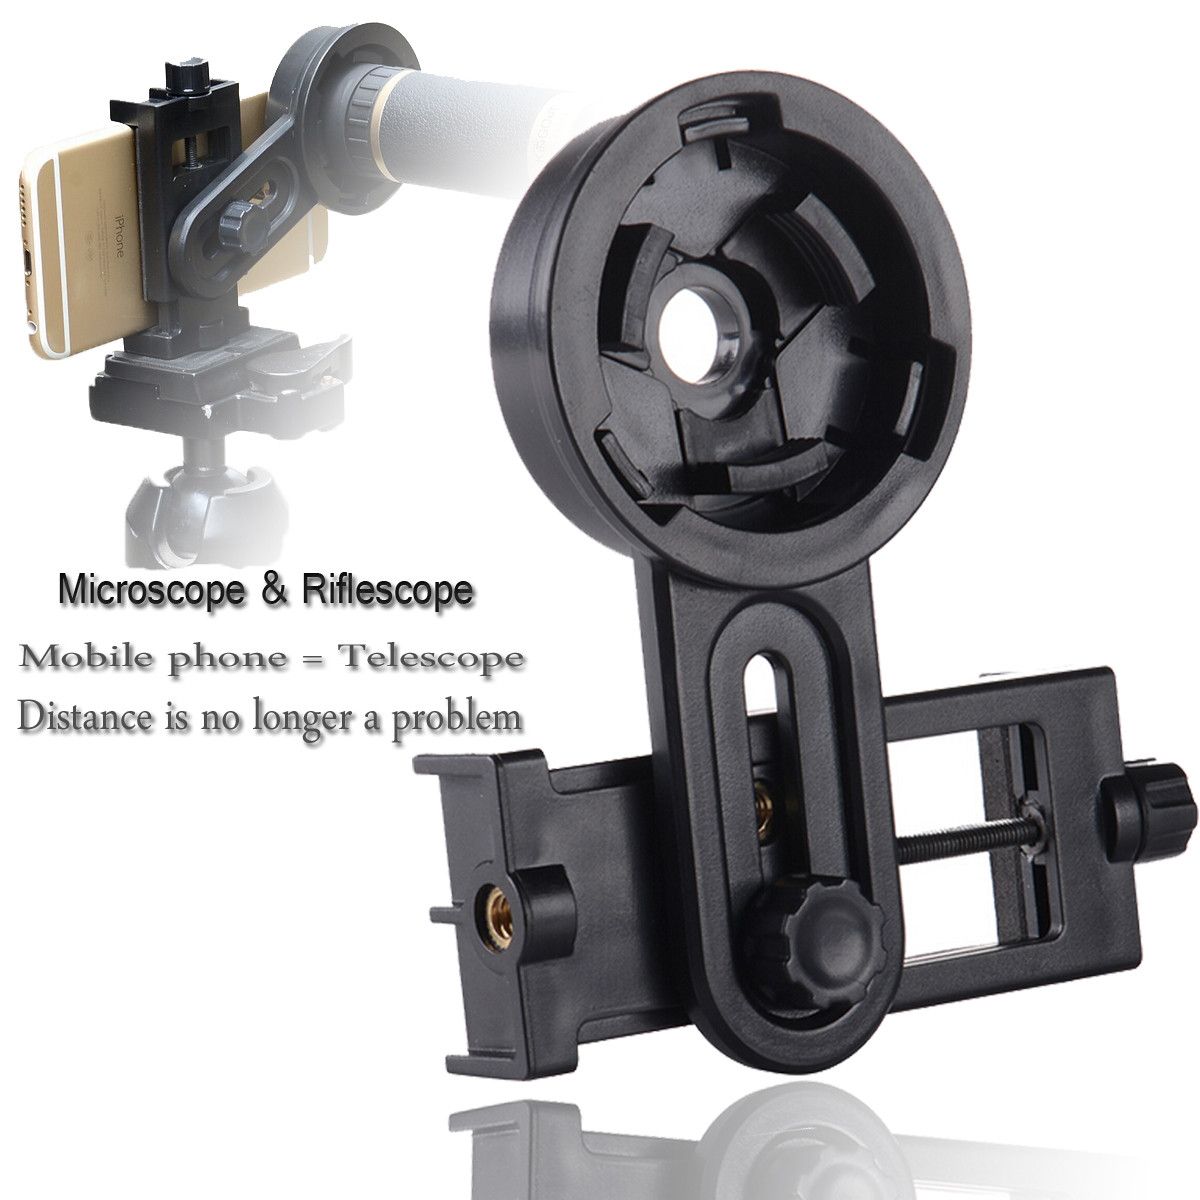 Universal-Astronomical-TelescopE-mount-Holder-Adapter-Clip-For-Smartphone-Camera-1058374